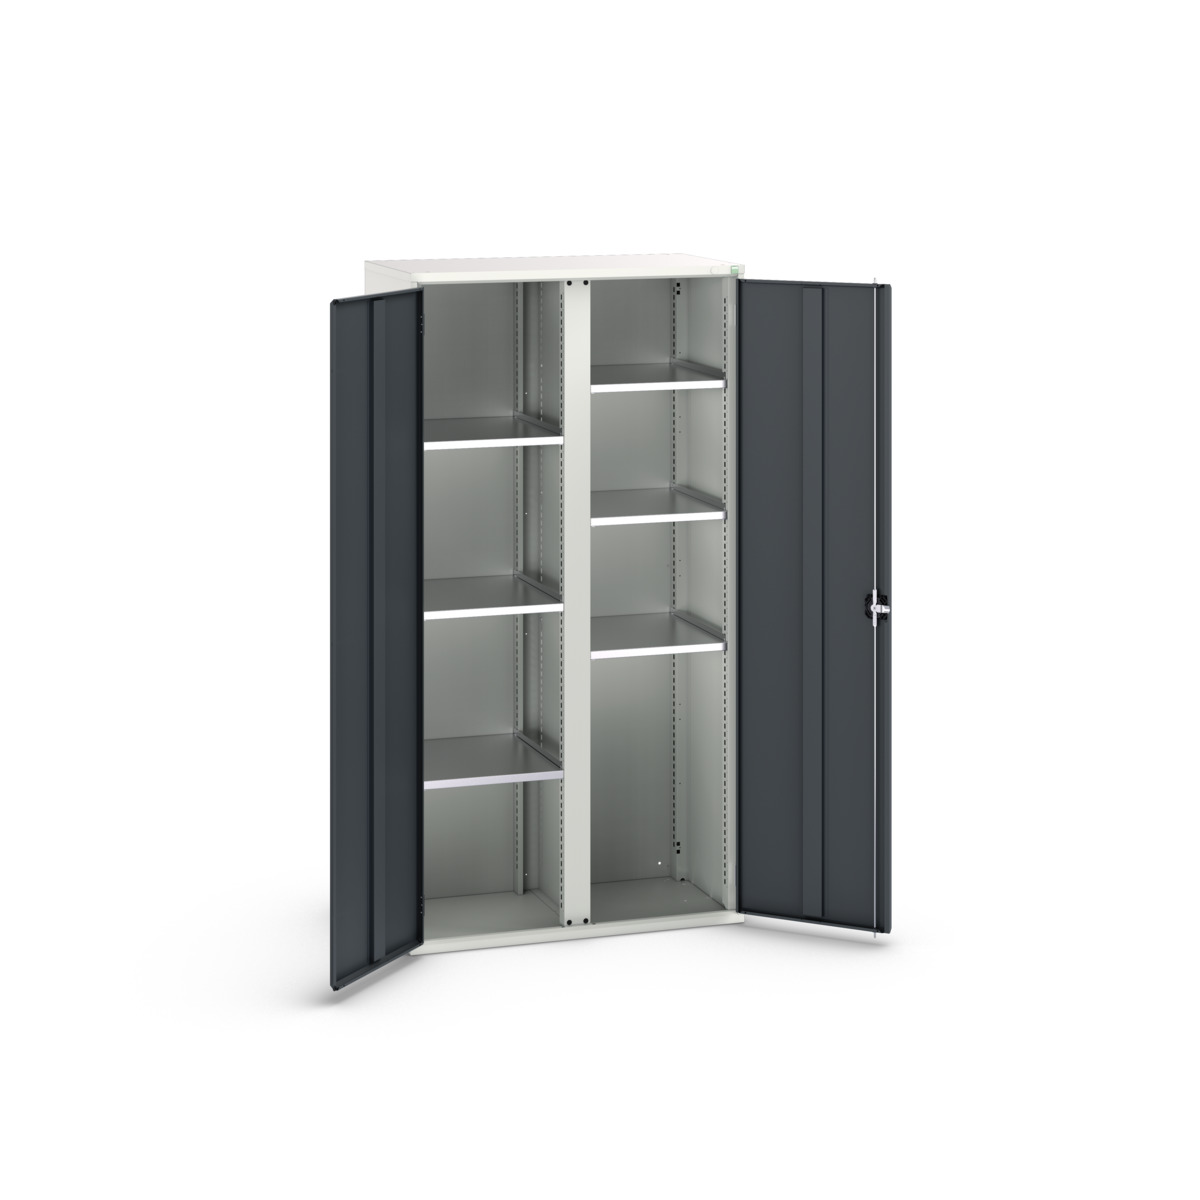 16926580.19 - verso kitted cupboard